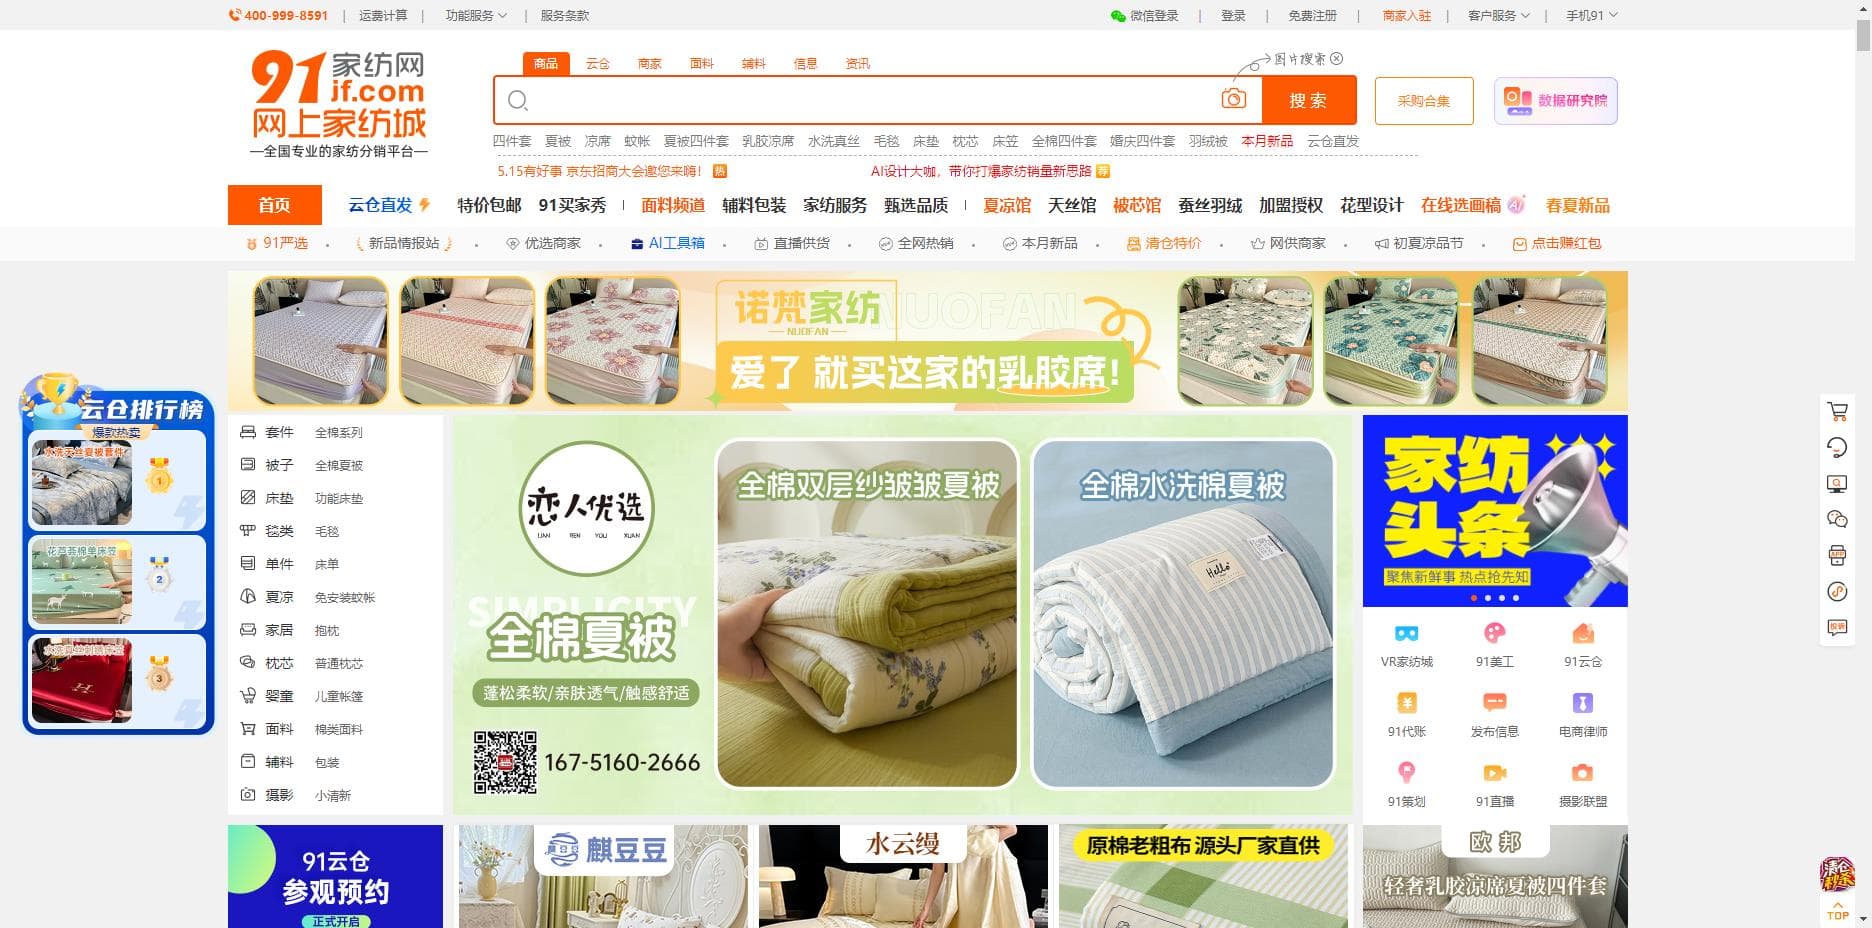 China Wholesale Platforms Catering to Specific Categories